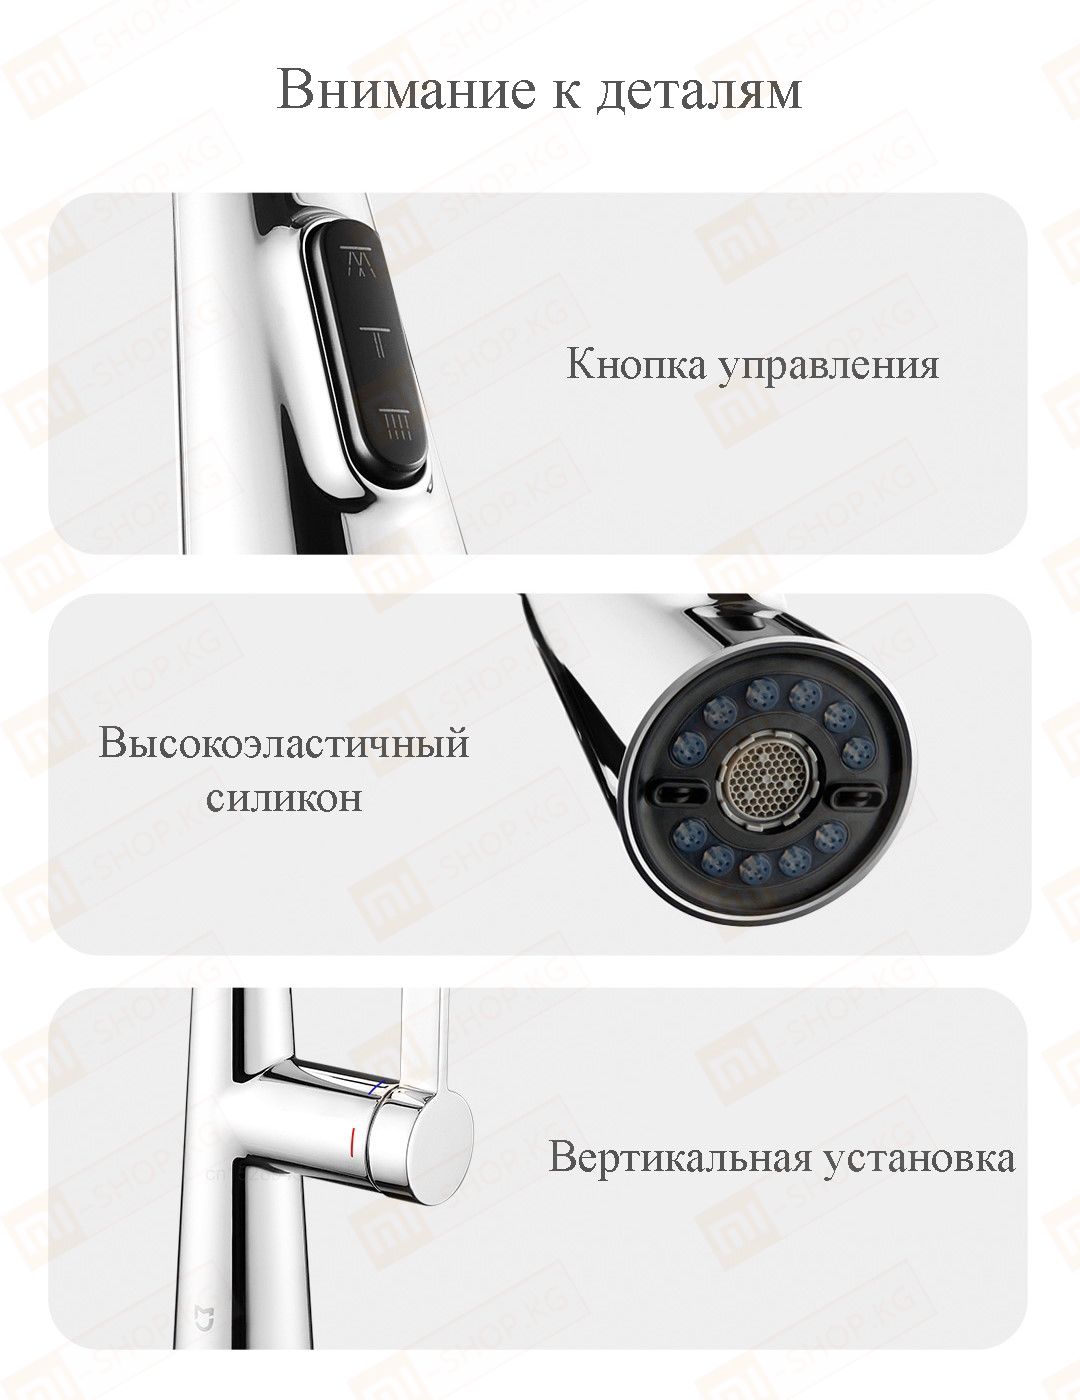 Xiaomi Mijia Pull-out kitchen Faucet S1